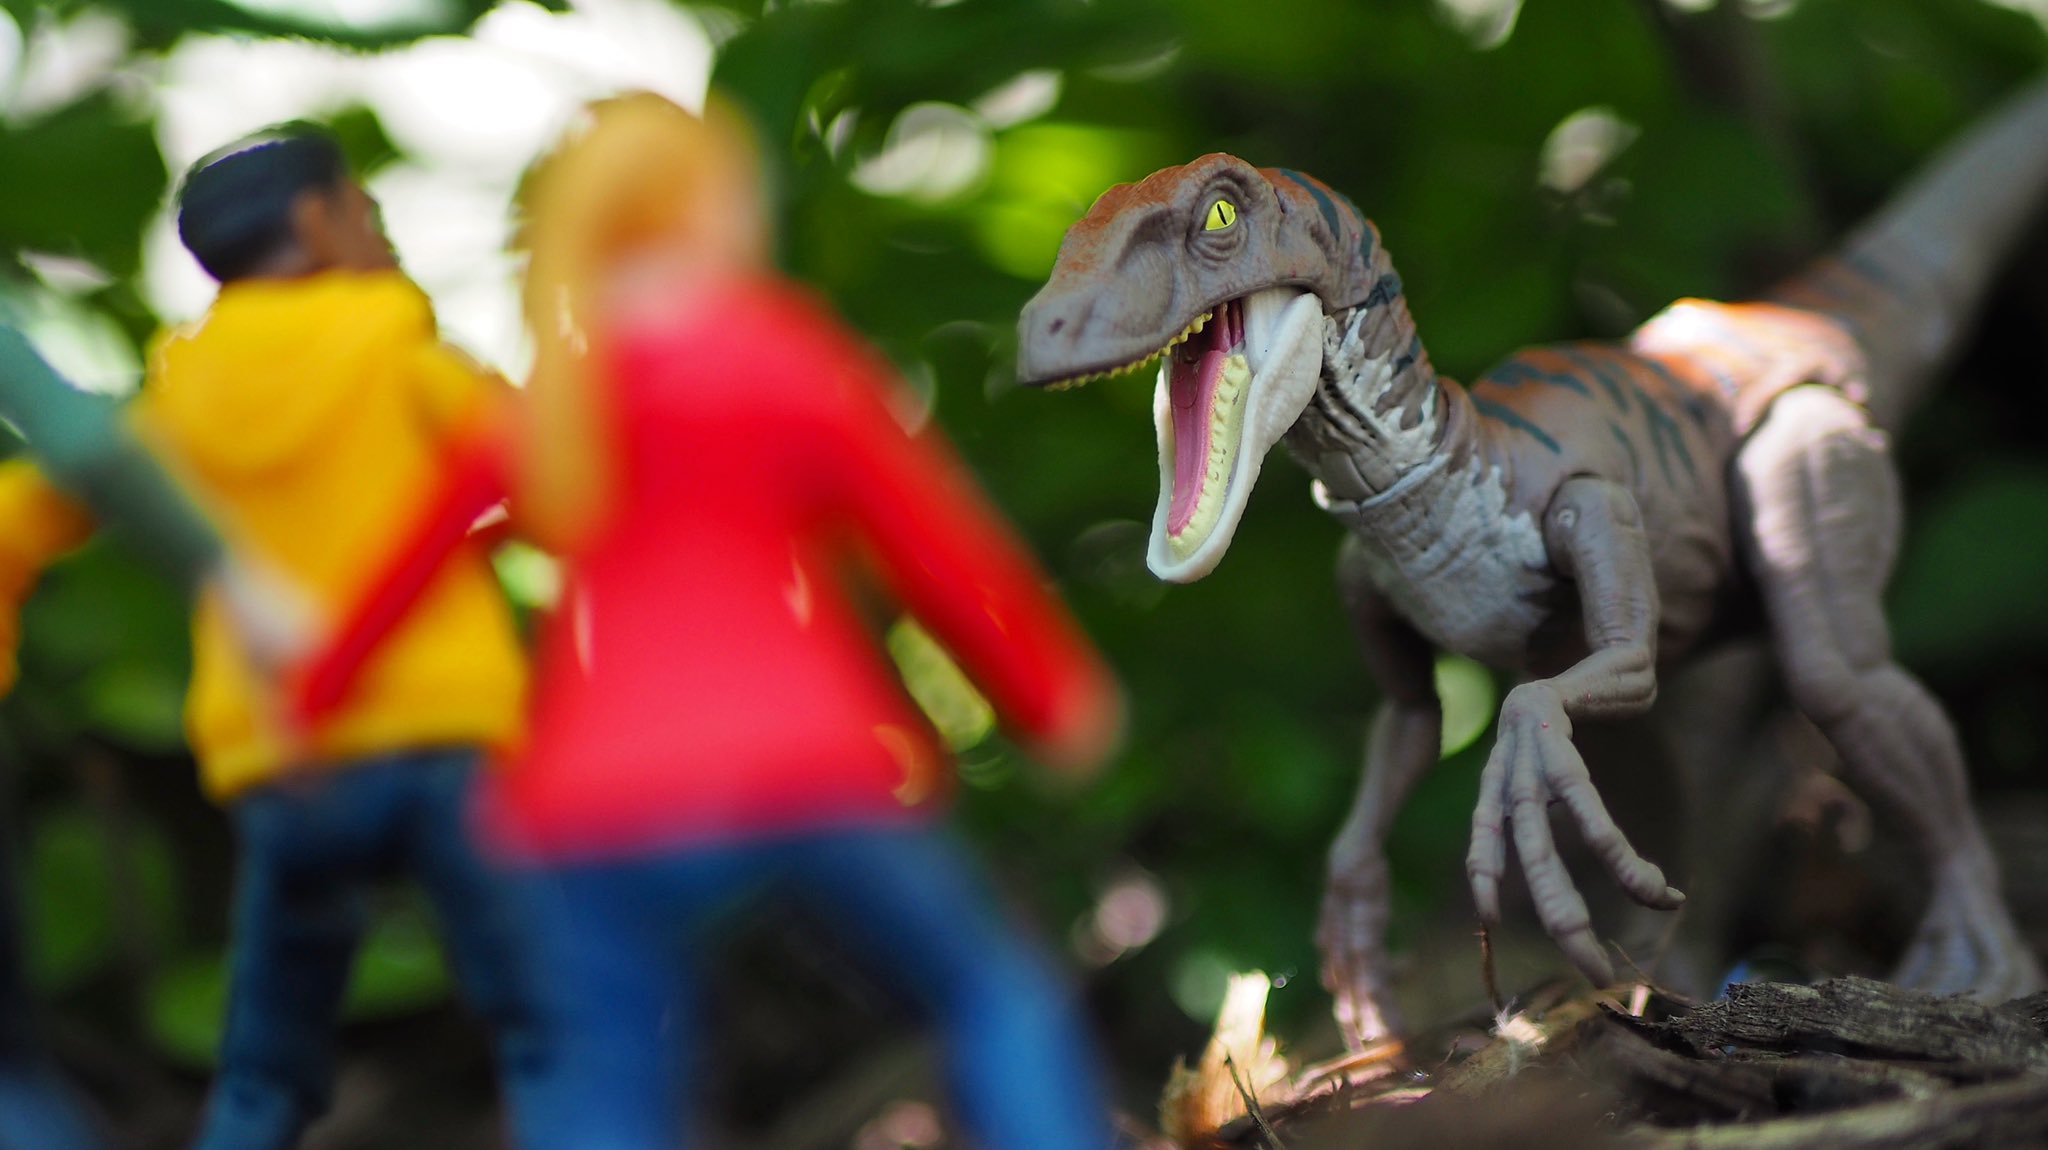 Collect Jurassic Looks Like Campers Will Be Getting Up Close And Personal With The Raptor Squad In Netflix S Jurassic World Camp Cretaceous Series Mattel Plans To Release New Figures For